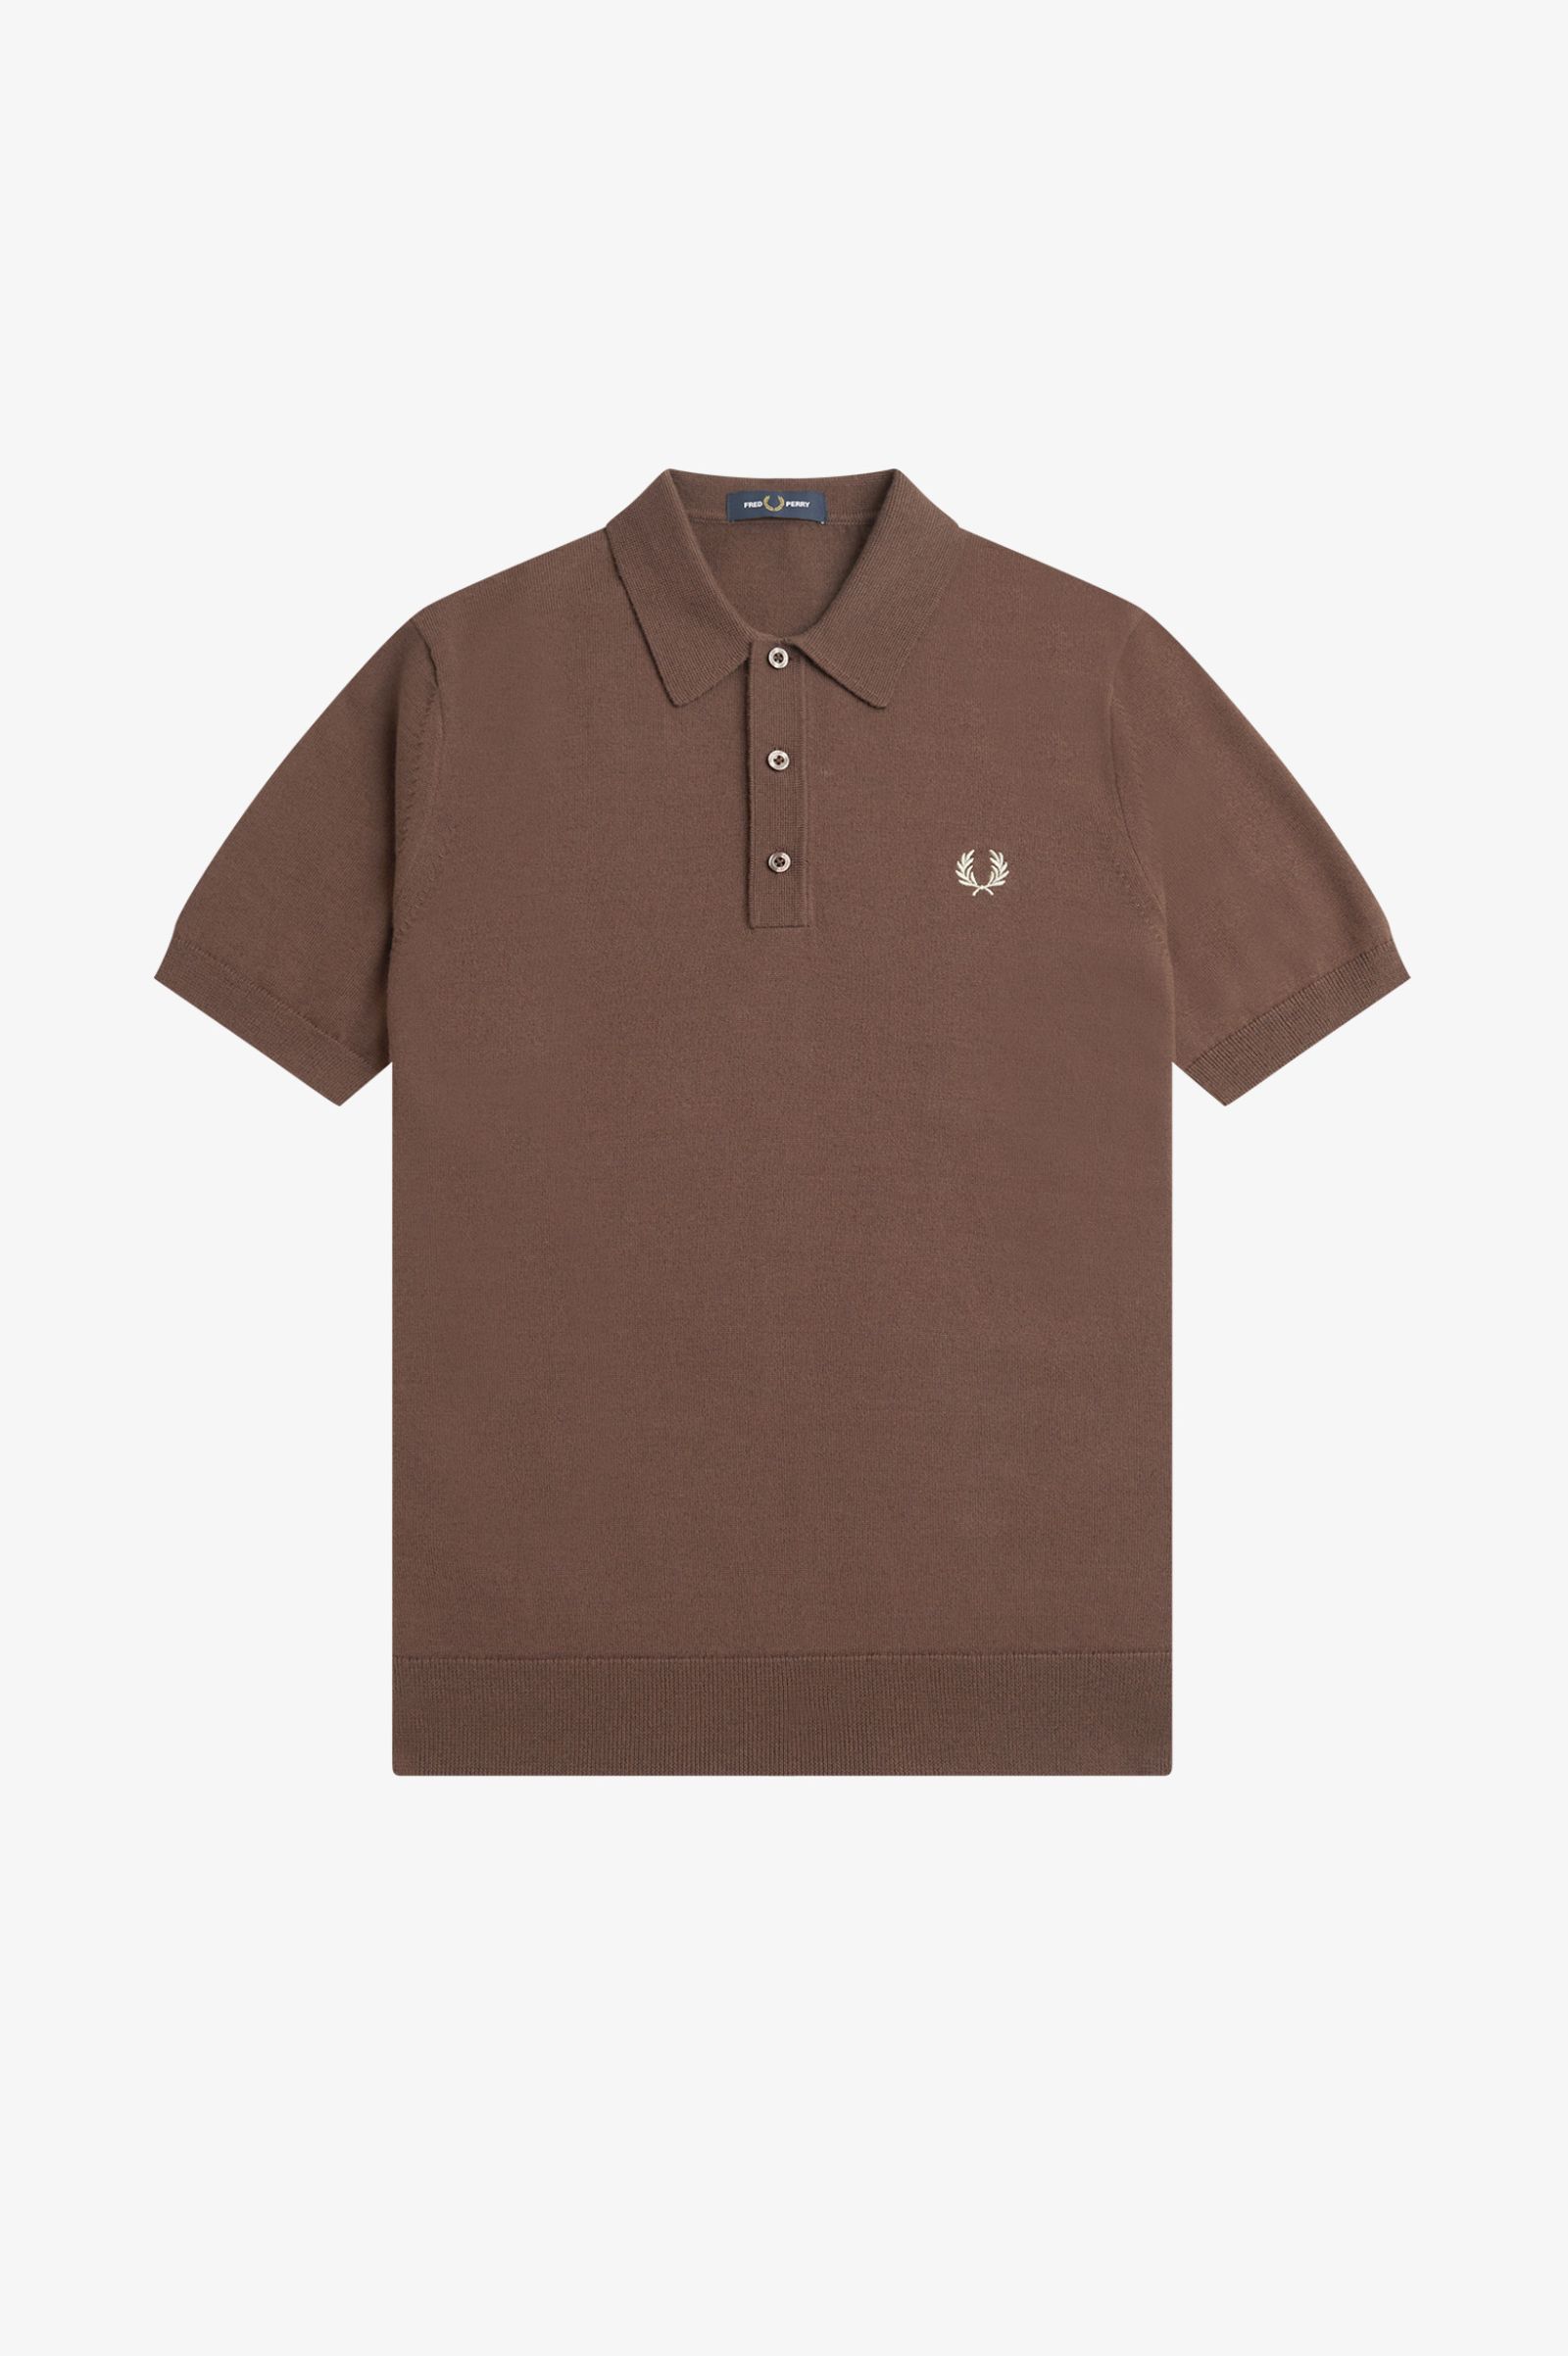 Fred Perry Classic Knitted Shirt in Carrington Brick